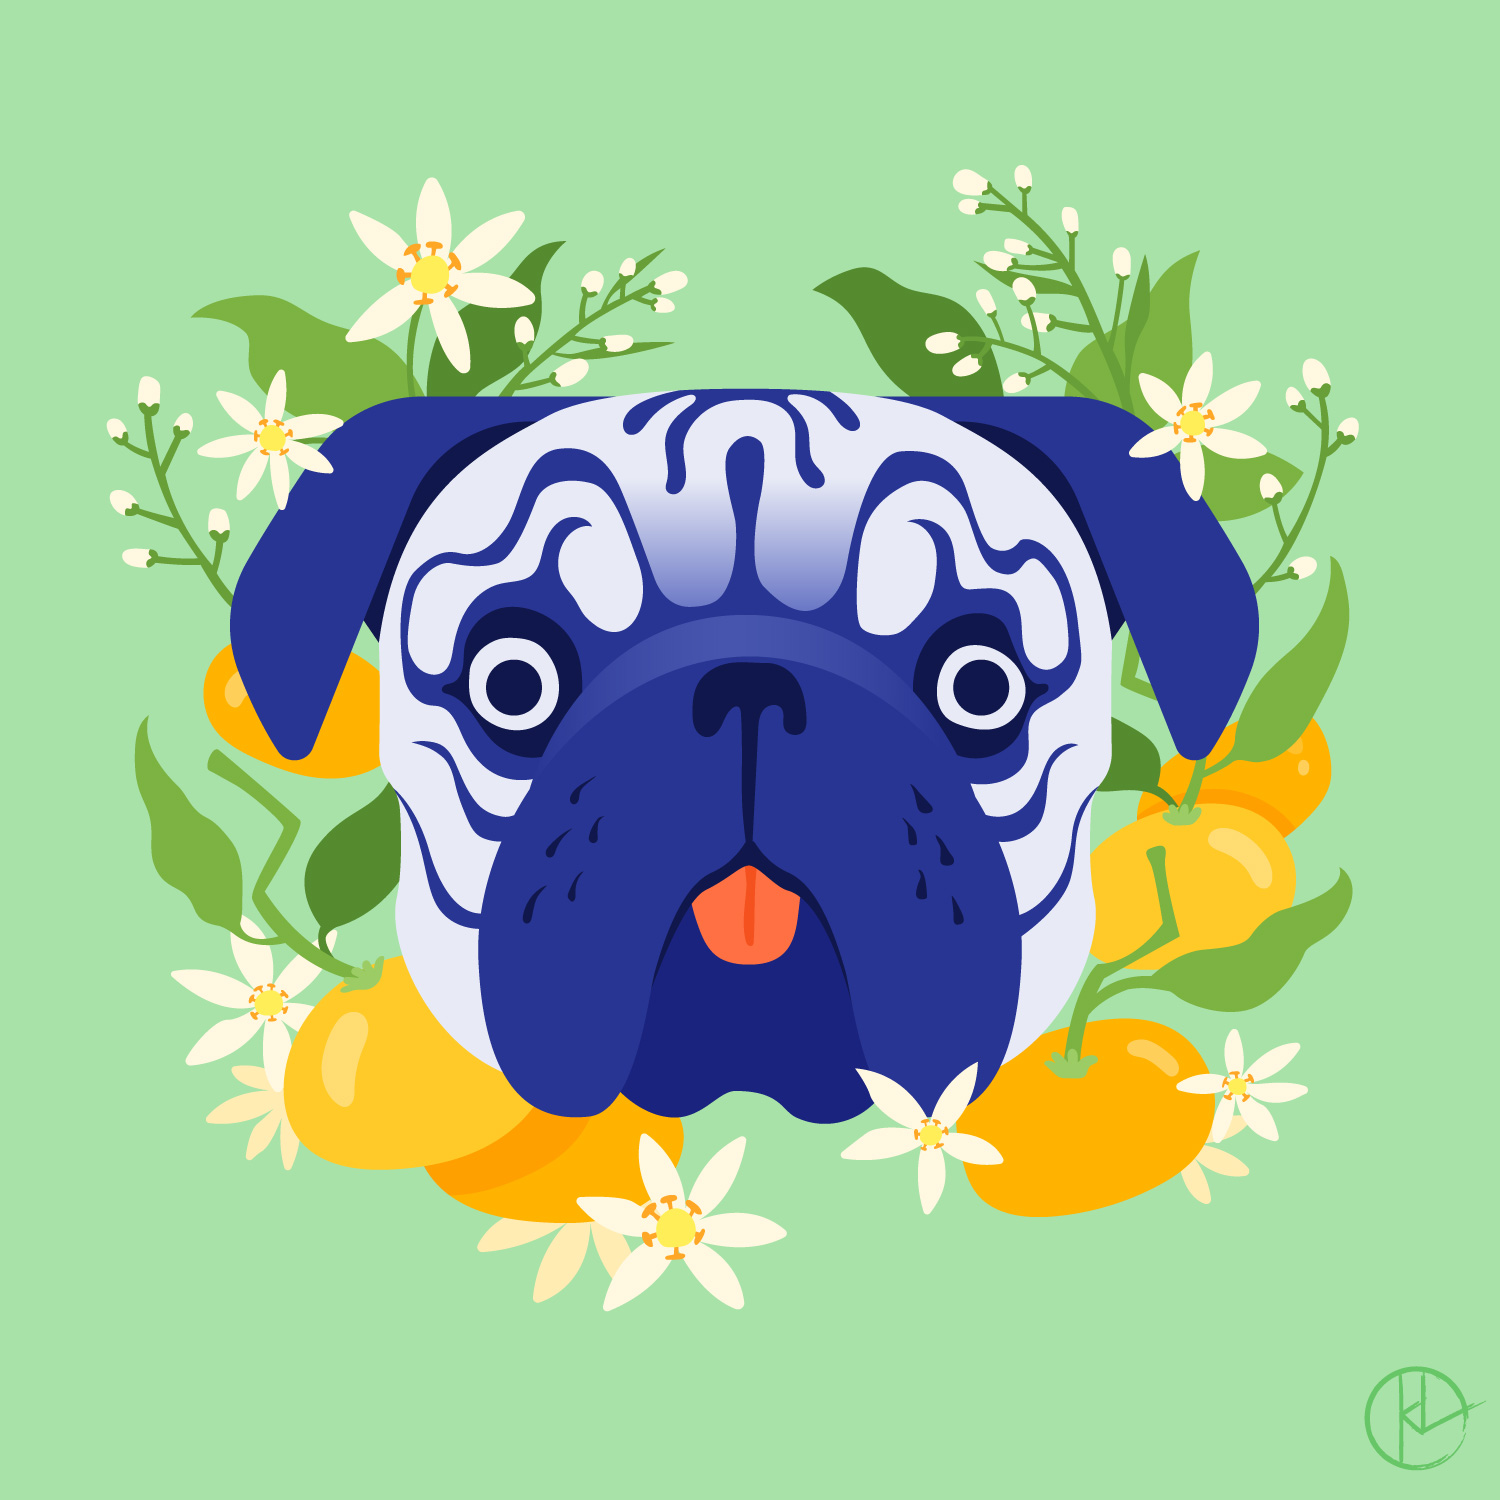 Pug illustration for Year of the Dog show